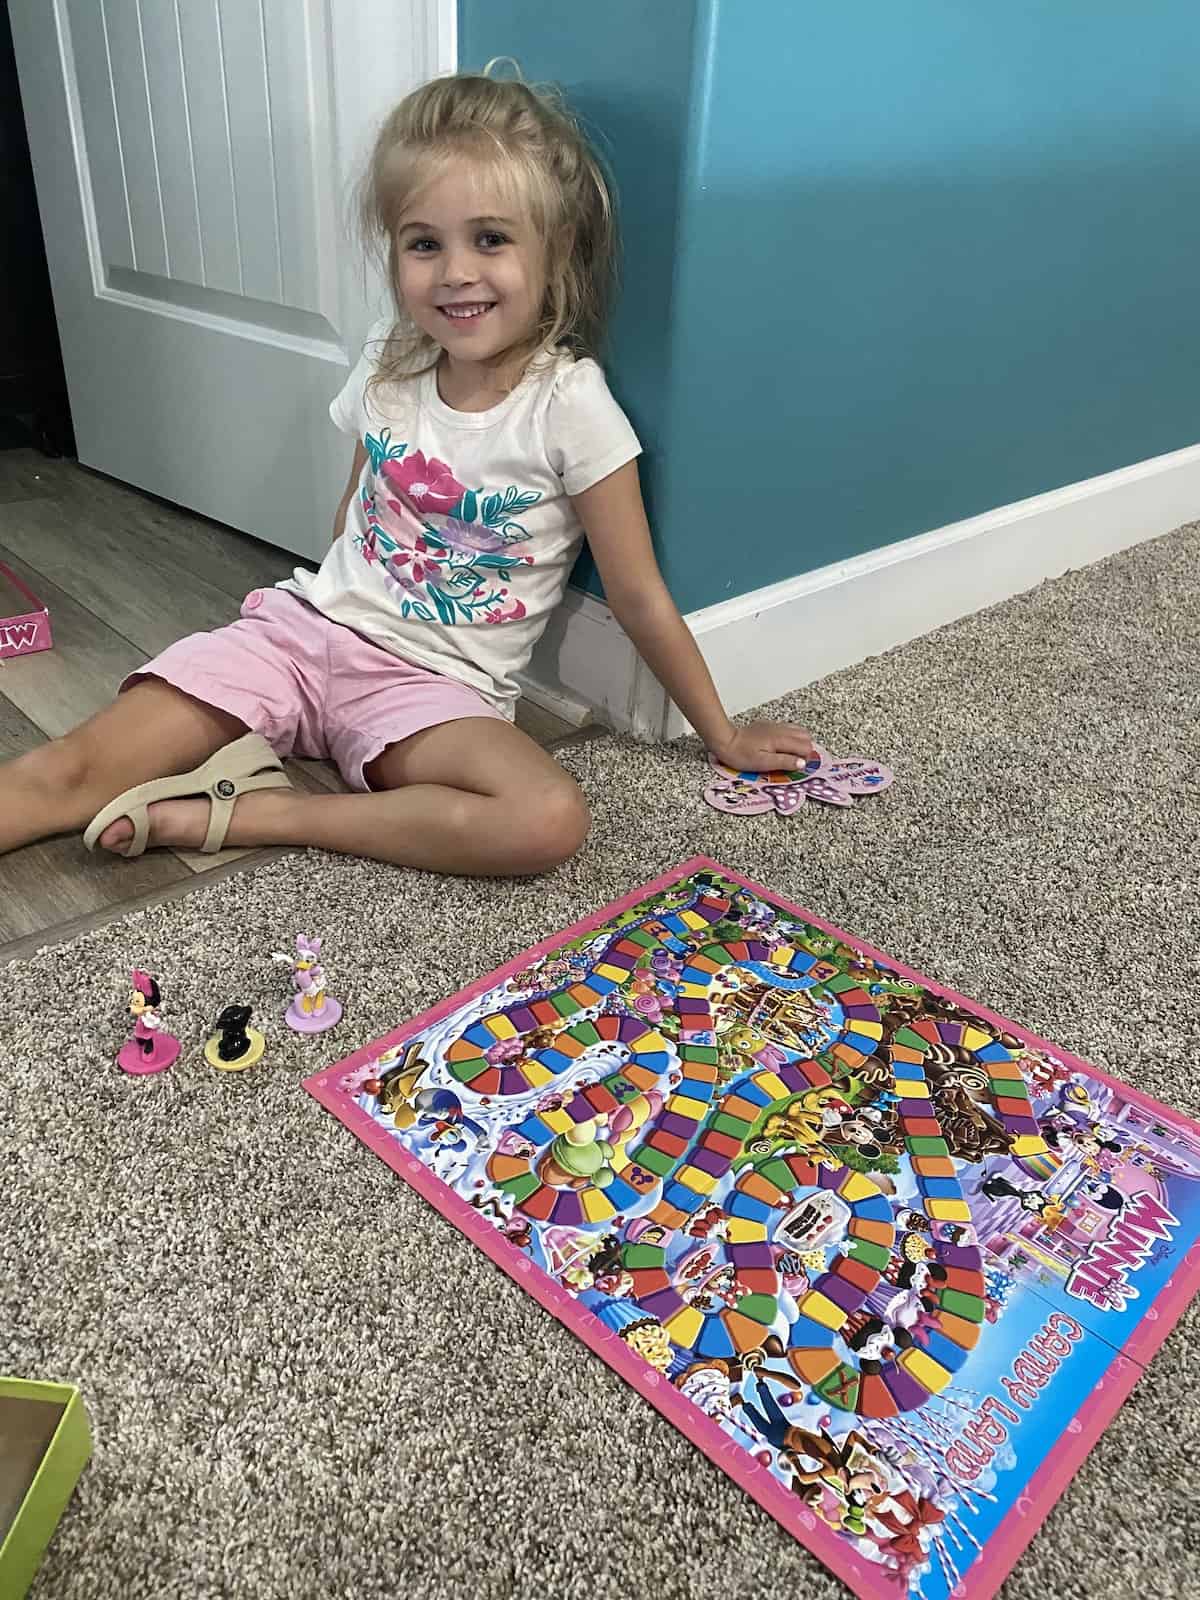 The Best Board Games for Kids: Family Board Game Fun!